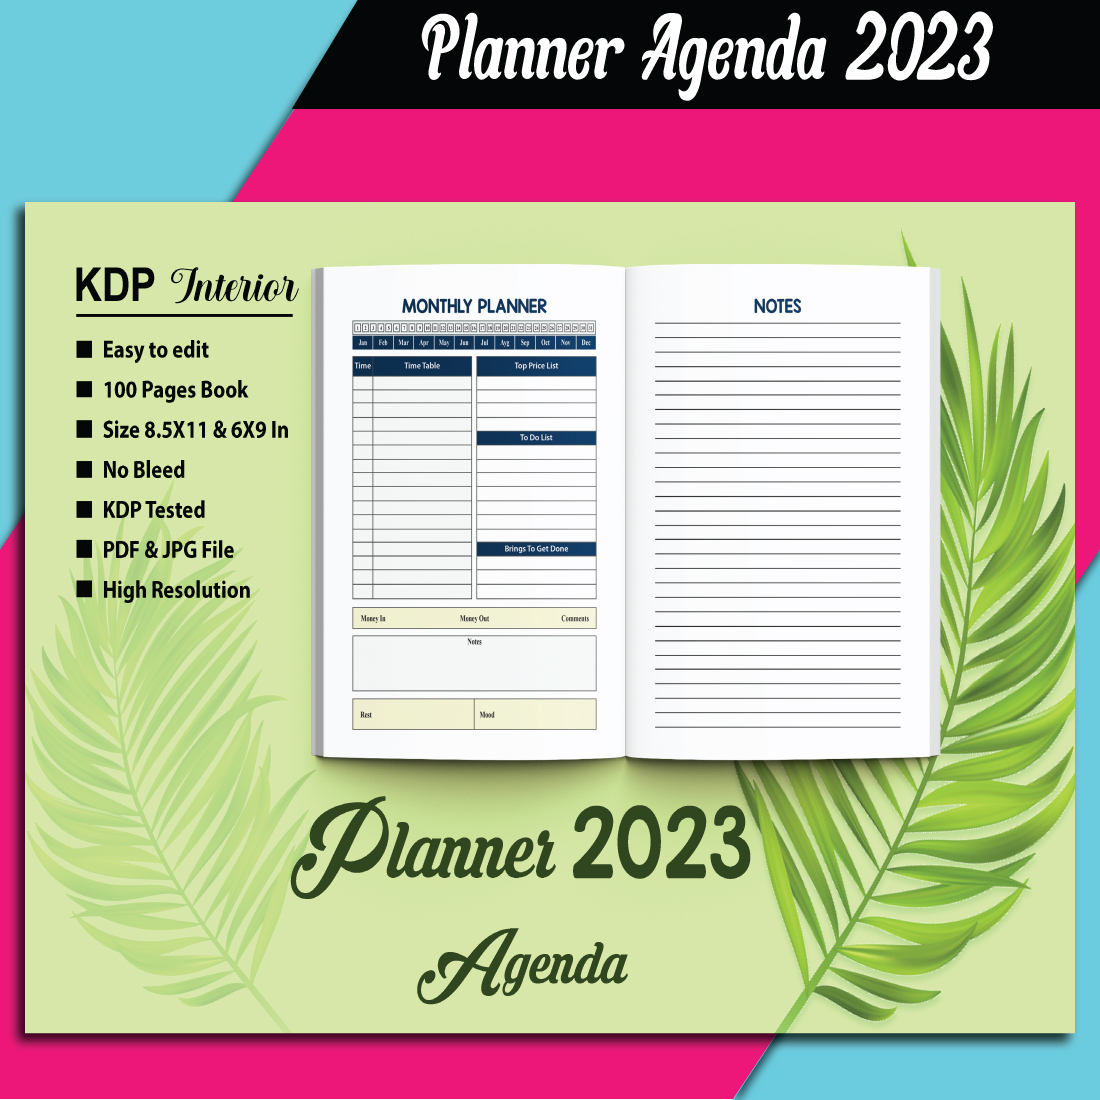 Planner and Agenda KDP Interior cover image.